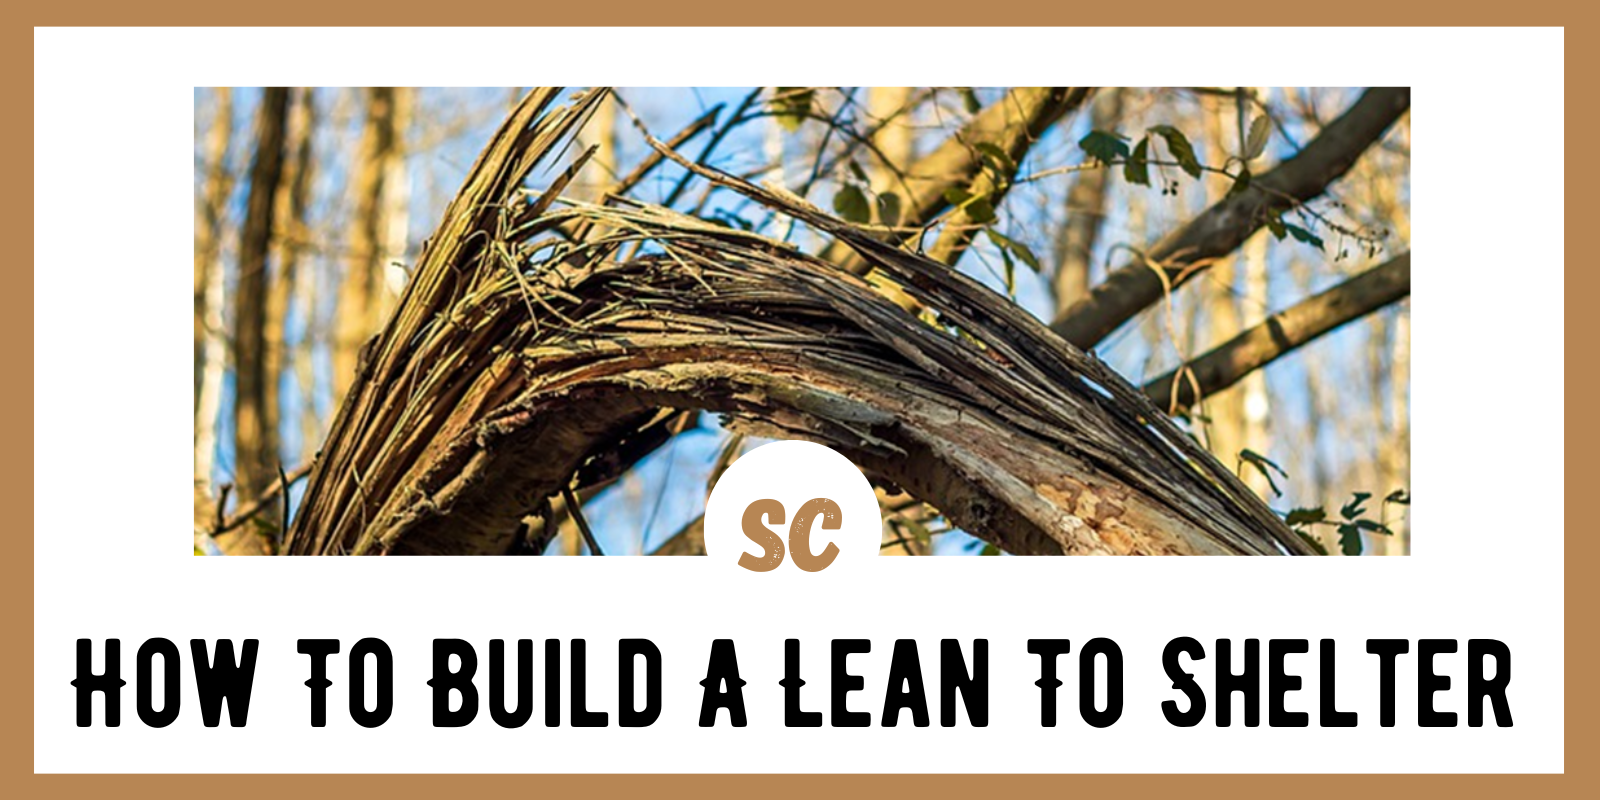 How To Build A Lean To Shelter